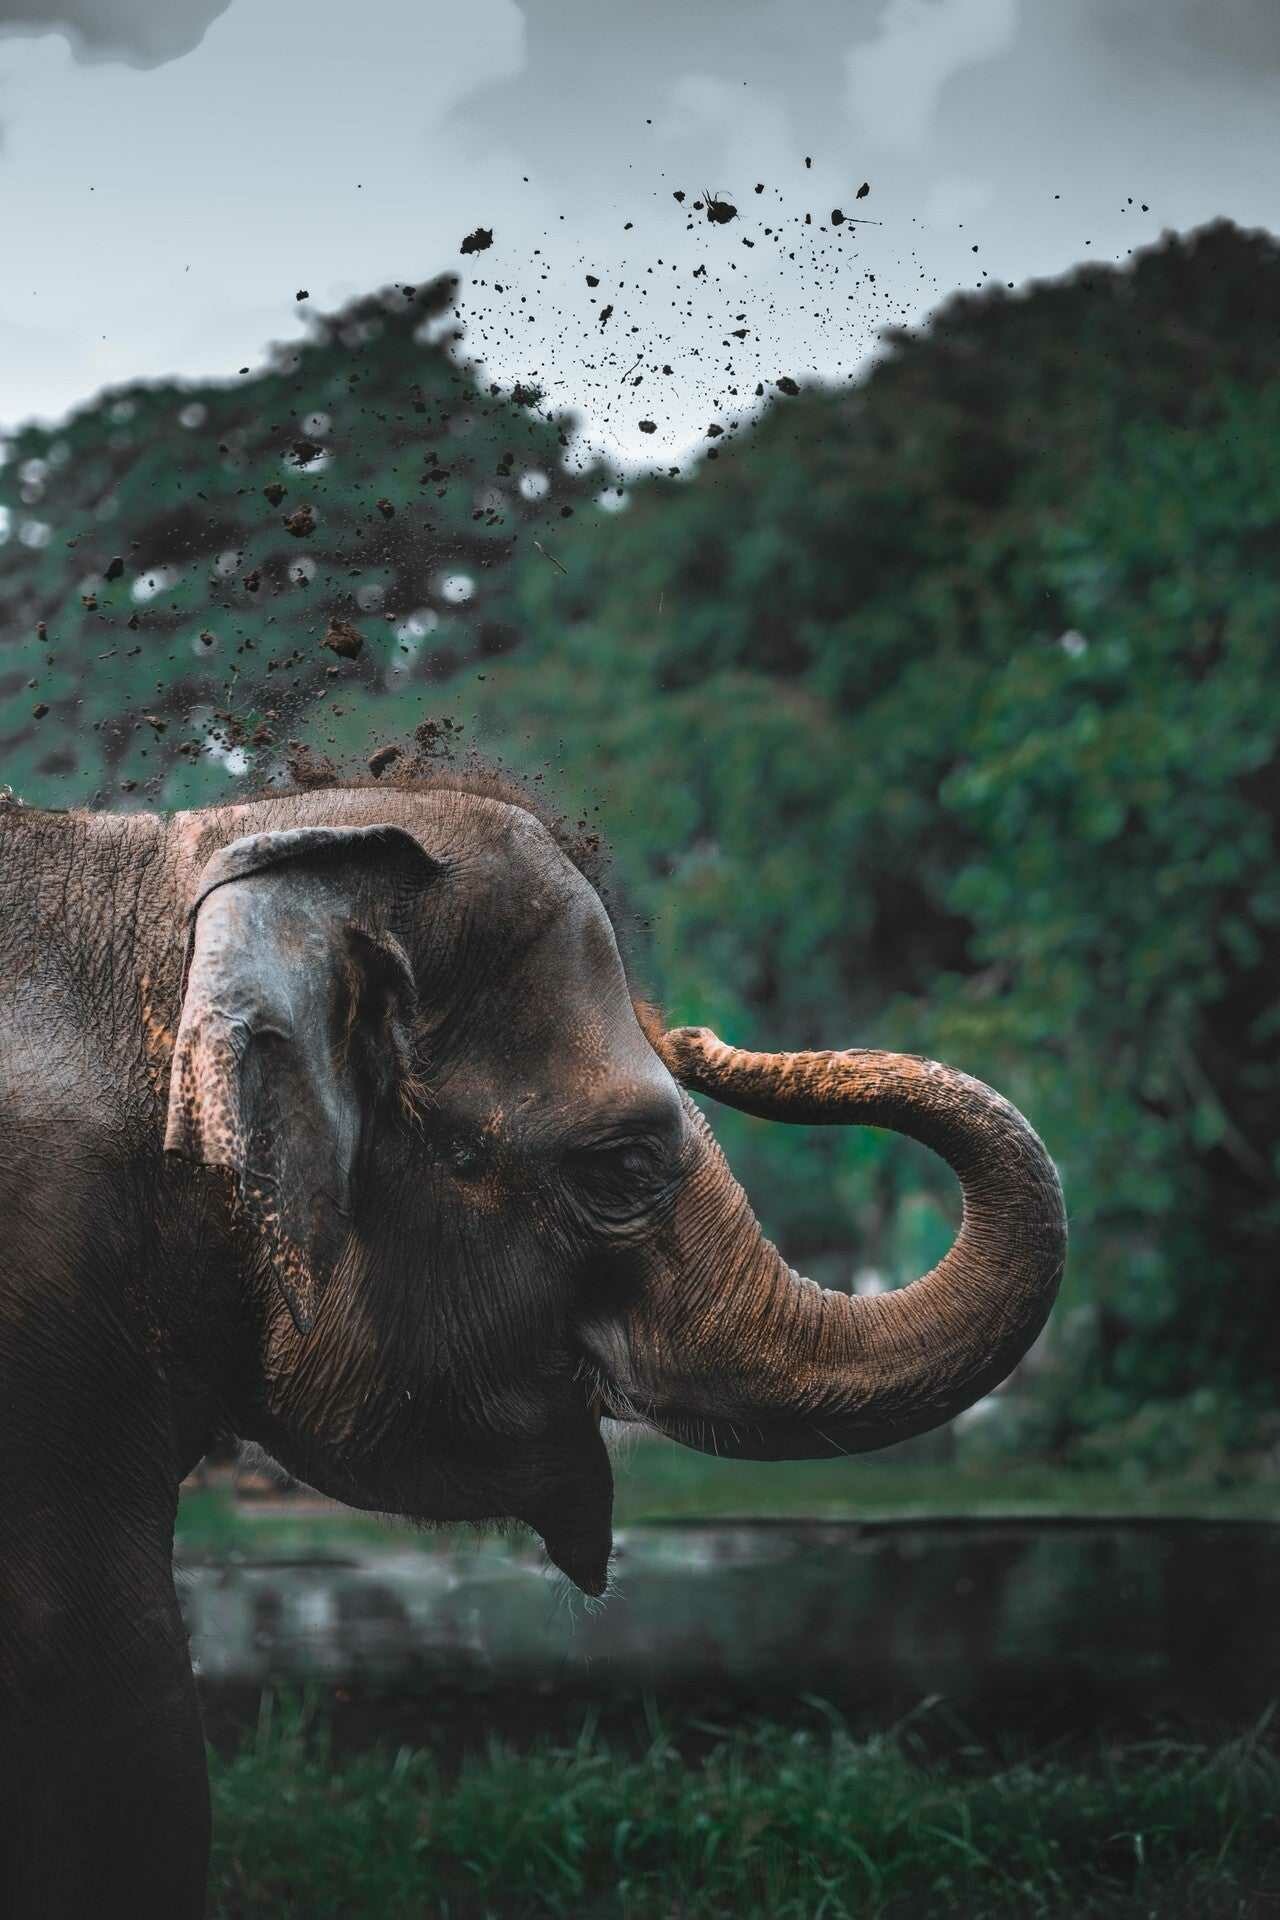 Elephant: Elephants are capable of hearing at low frequencies and are most sensitive at 1 kHz. 1280x1920 HD Wallpaper.